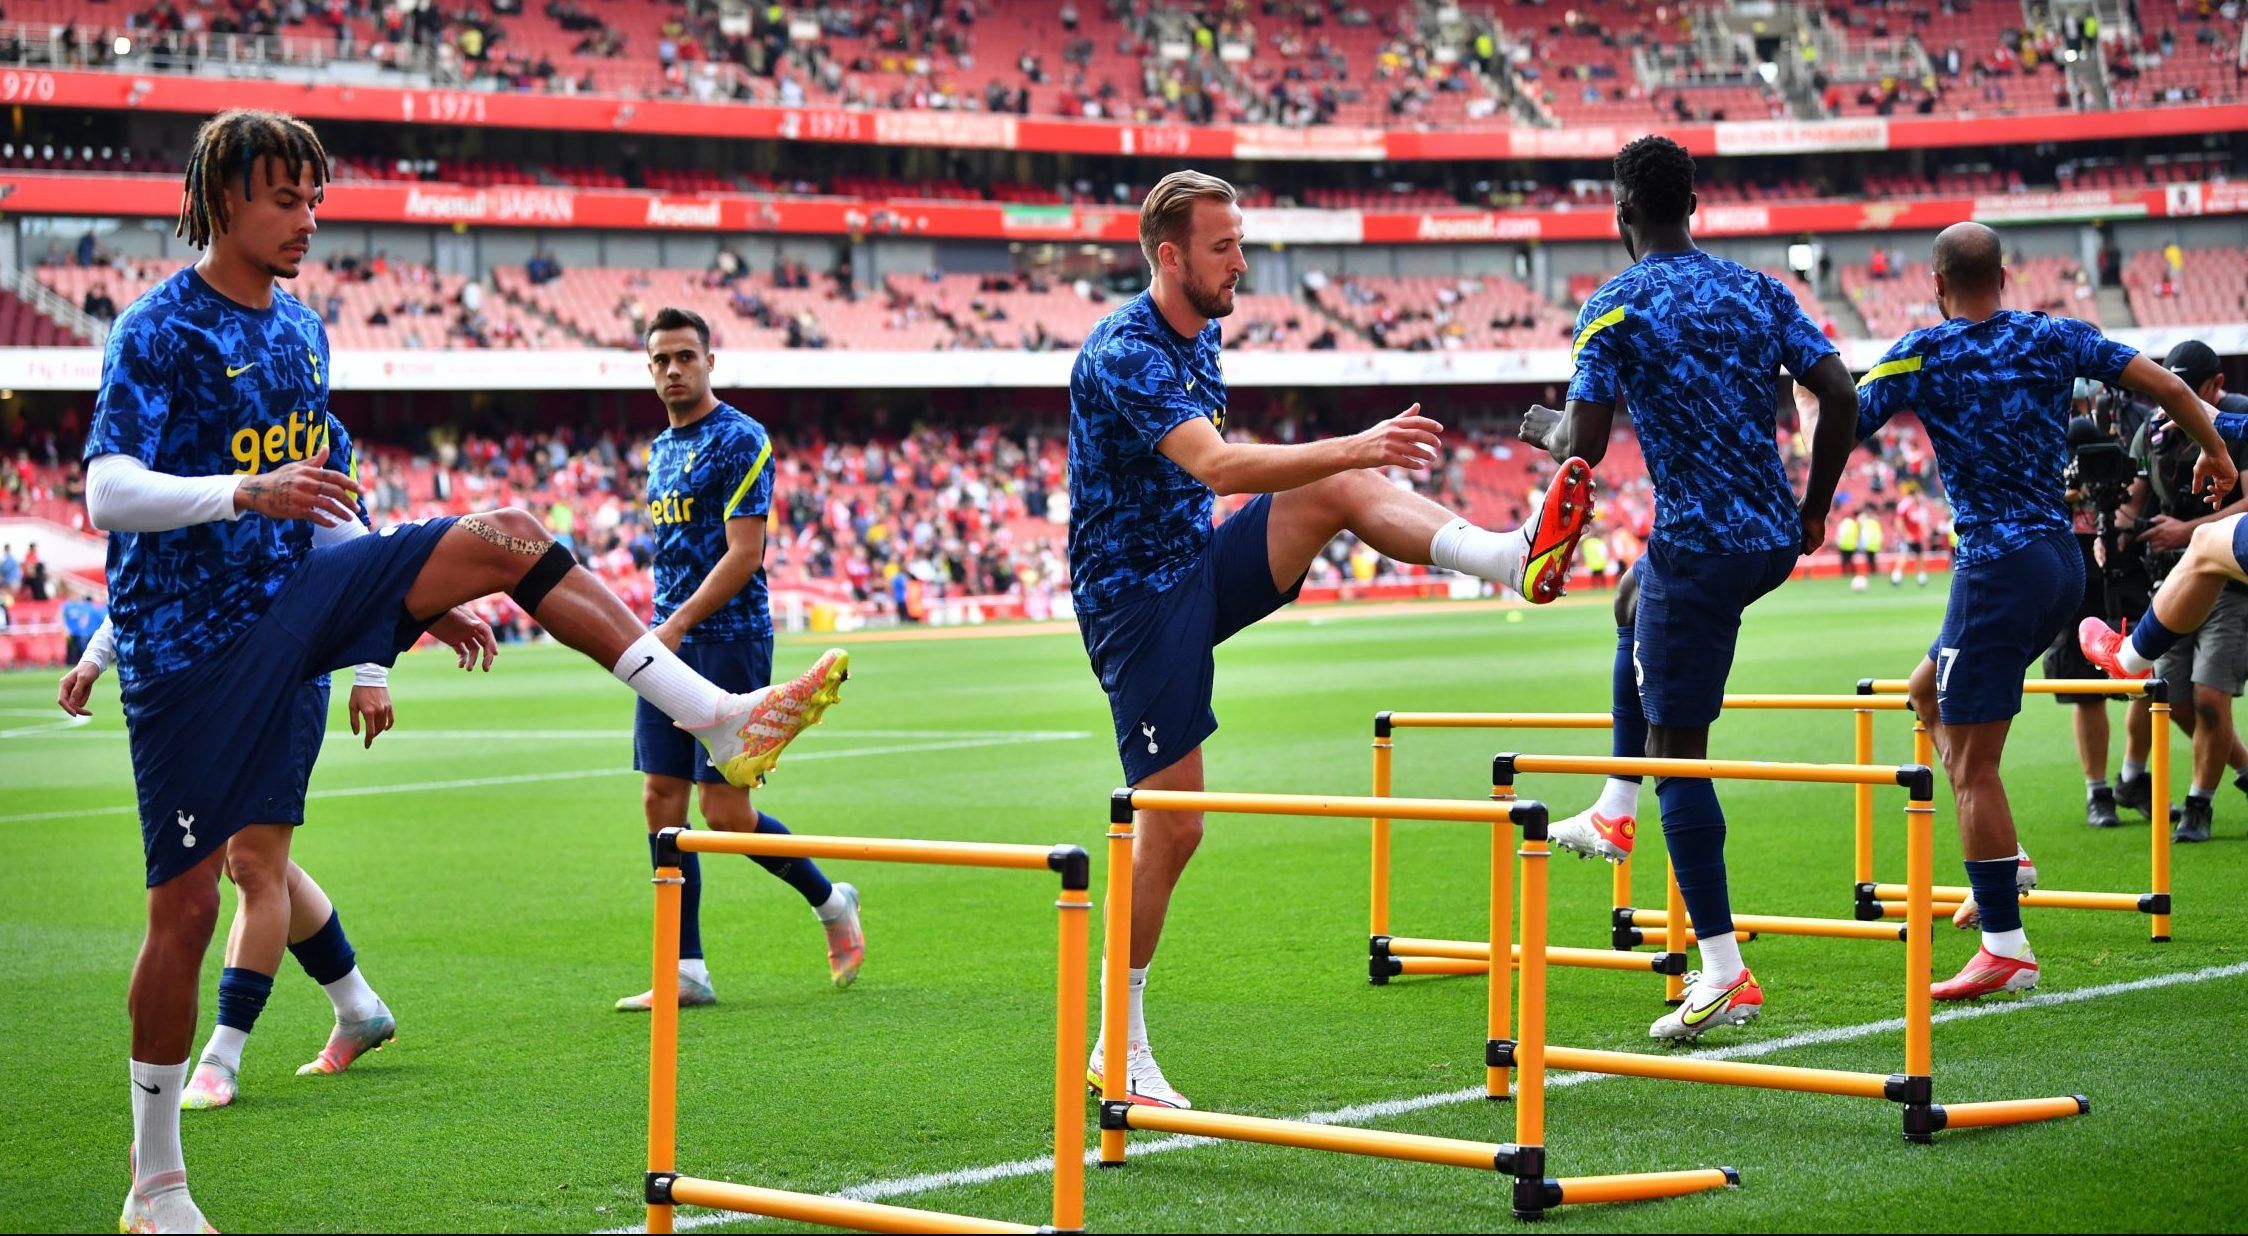 Spurs players warm up against Arsenal in the Premier League